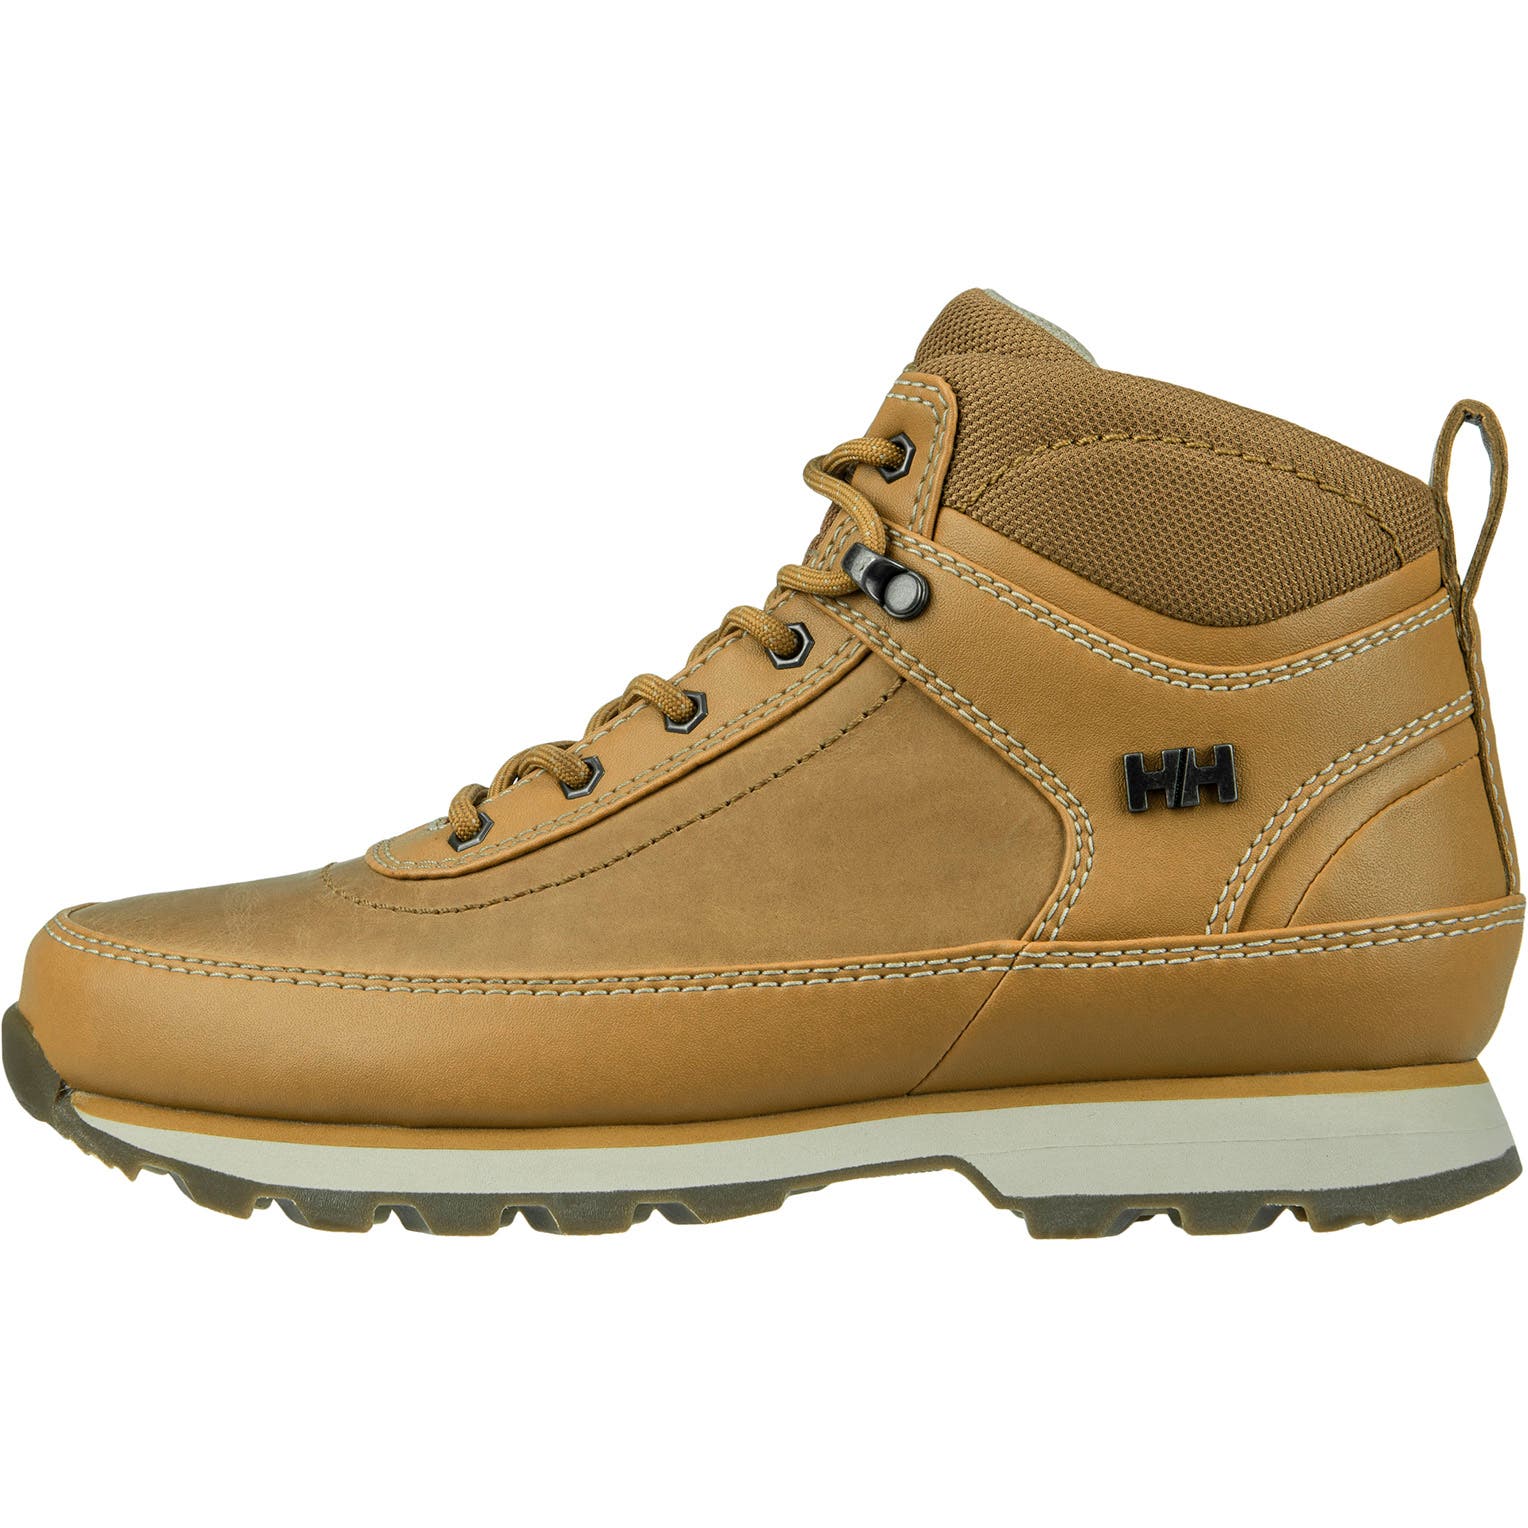 Helly Hansen Women's Calgary Winter Boot in Bone Brown-Natura-Hh from the side